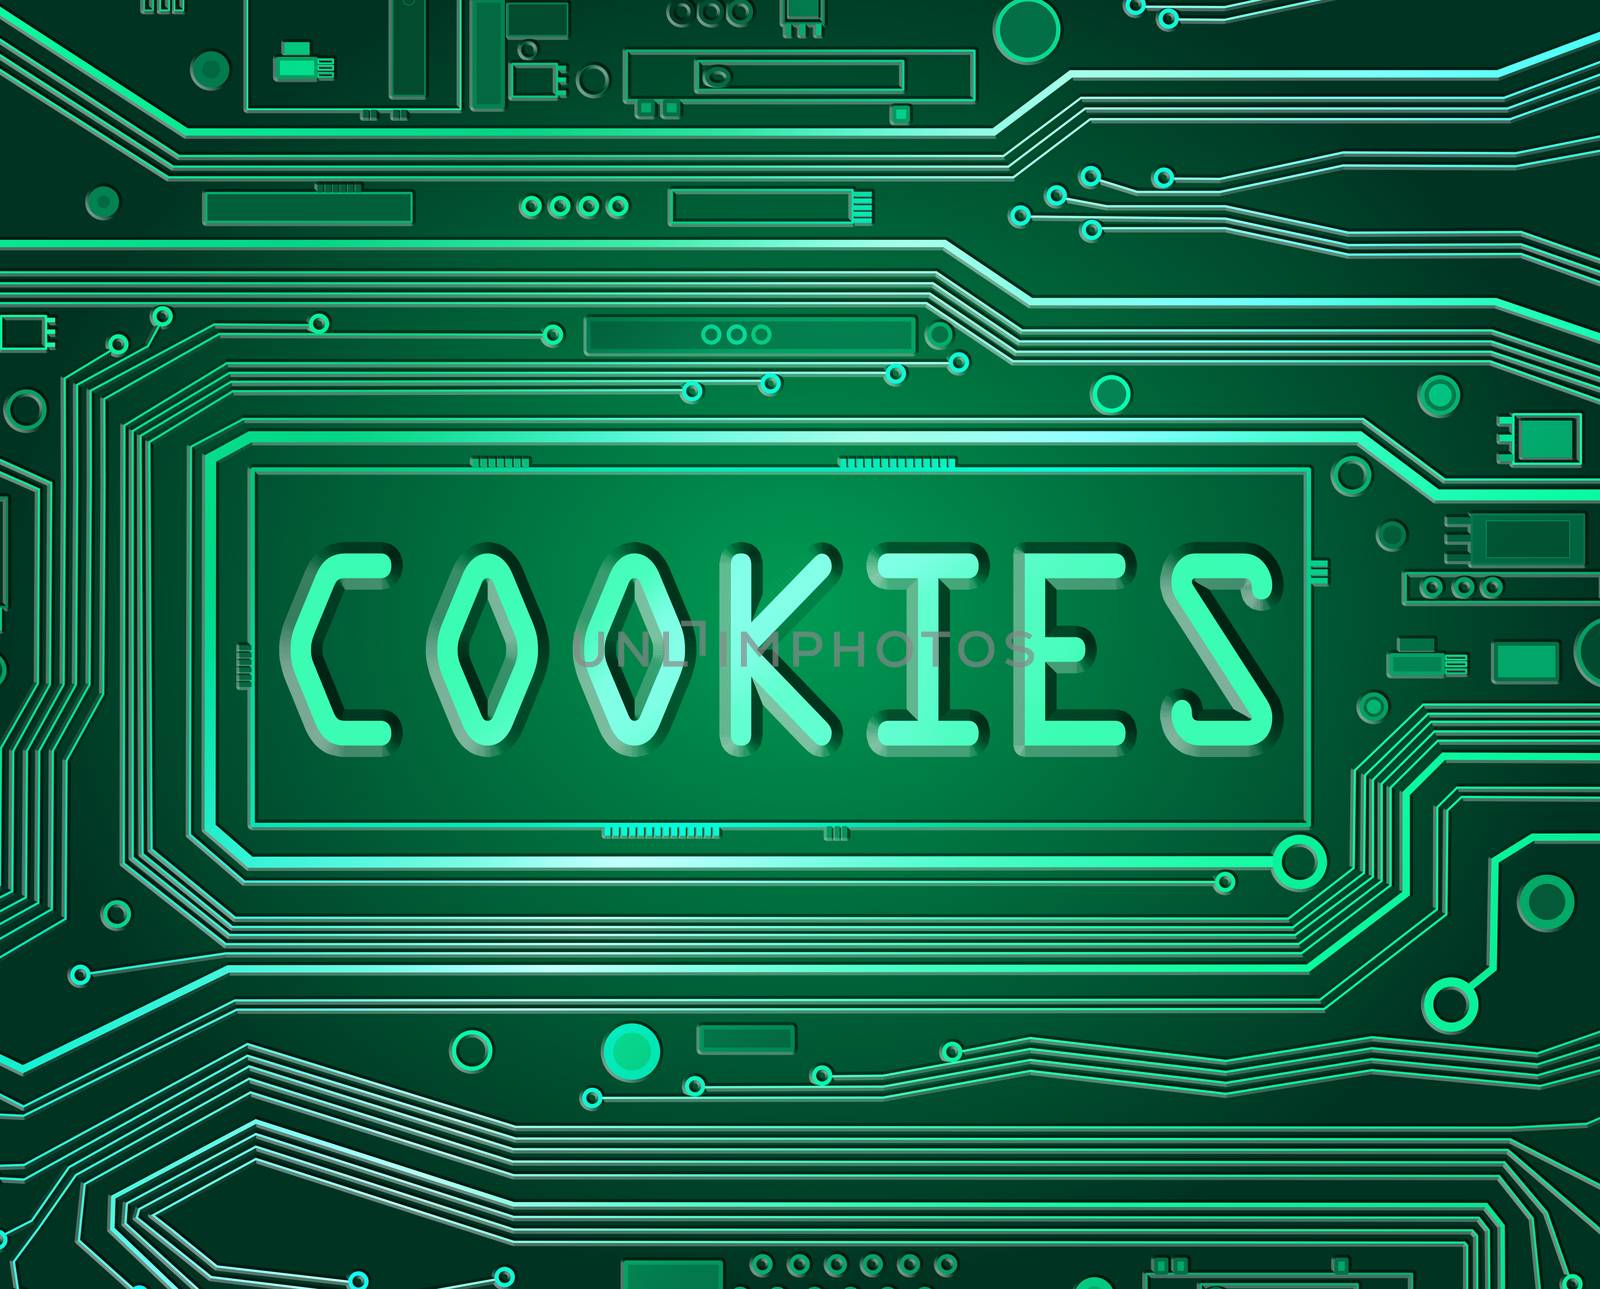 Abstract style illustration depicting printed circuit board components with a cookies concept.